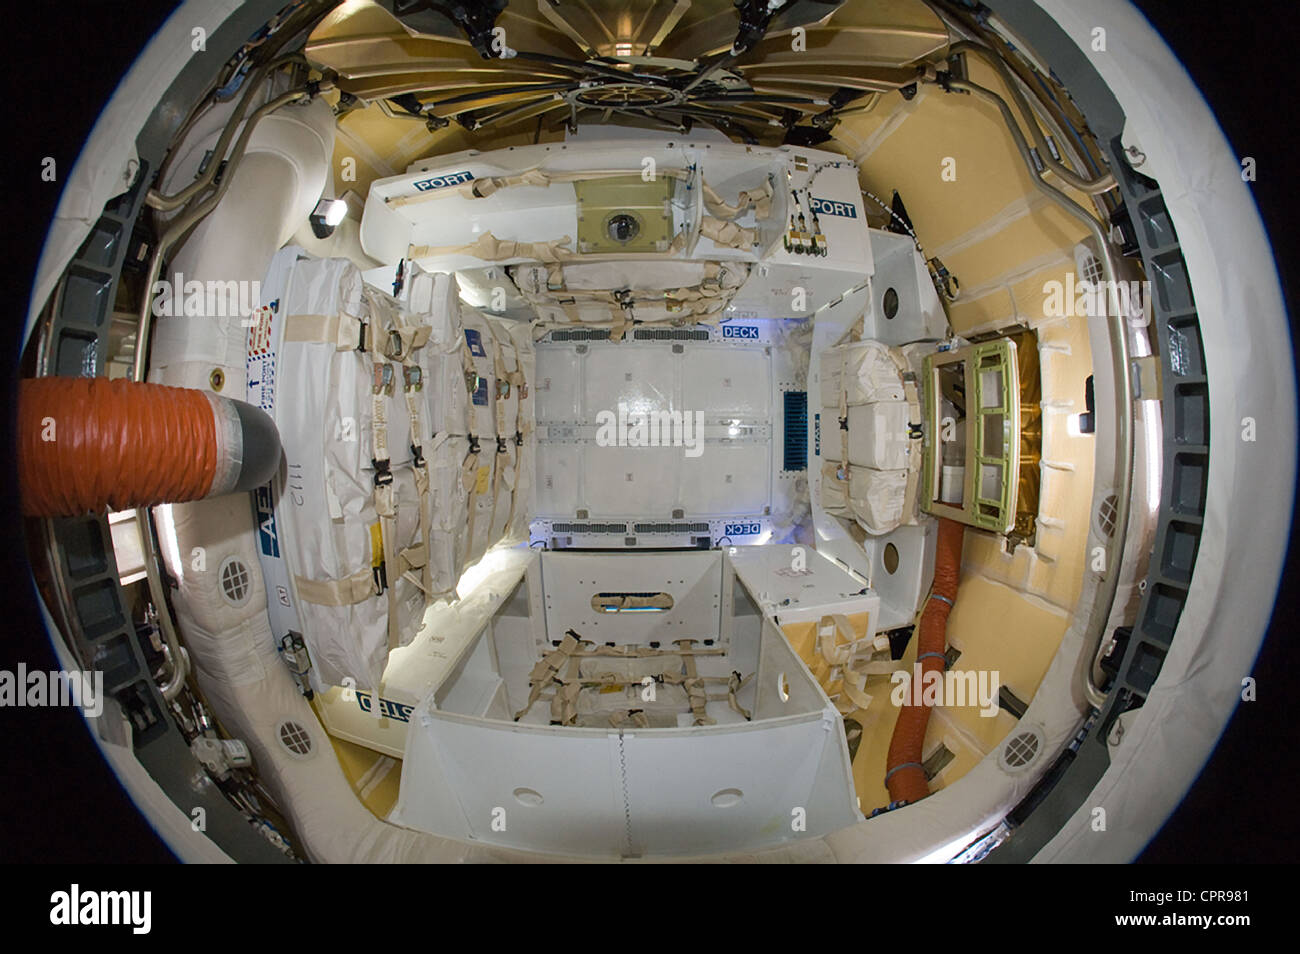 A fisheye view of the inside of the SpaceX Dragon cargo craft berthed to the International Space Station on May 26, 2012. Dragon became the first commercially developed space vehicle to be launched to the ISS. Stock Photo